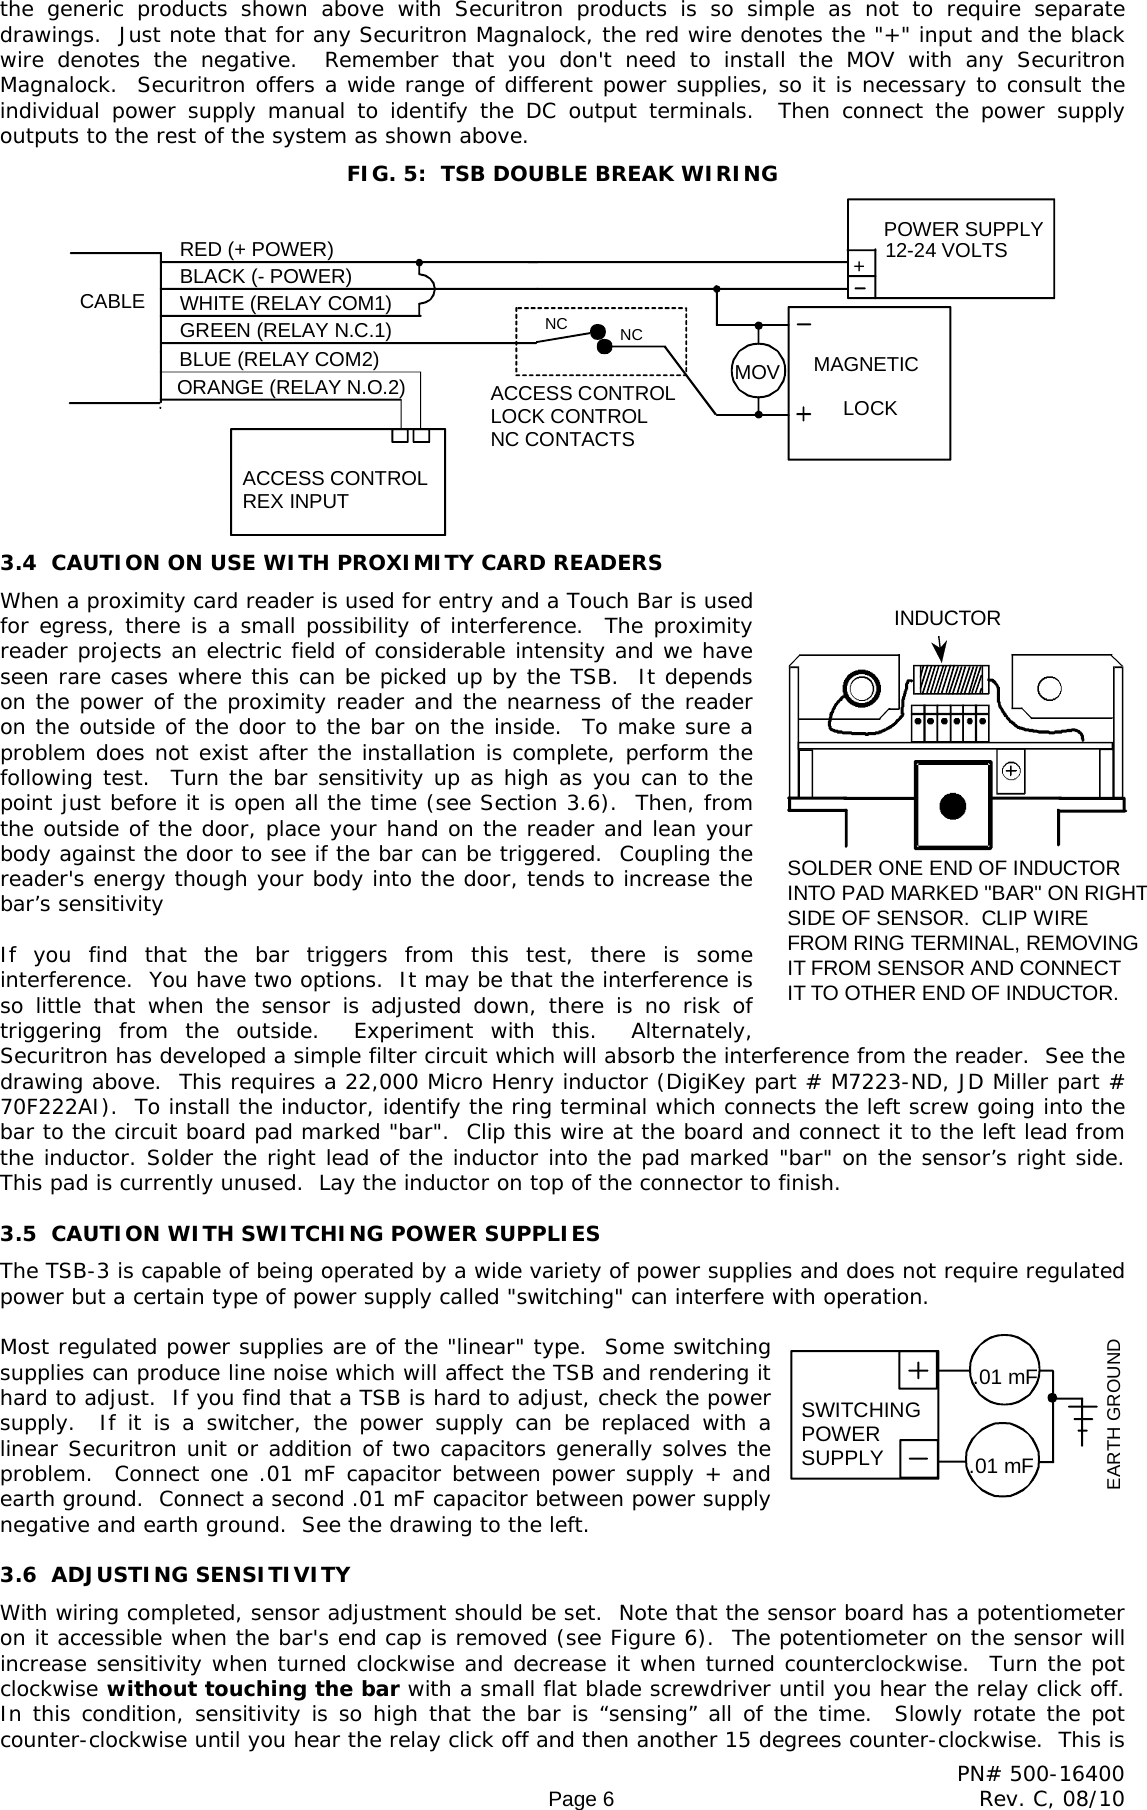 Page 6 of 11 - Securitron - TSB-3 SERIES 500-16400_C Installation And Operation Instructions IO 500-16400 20C